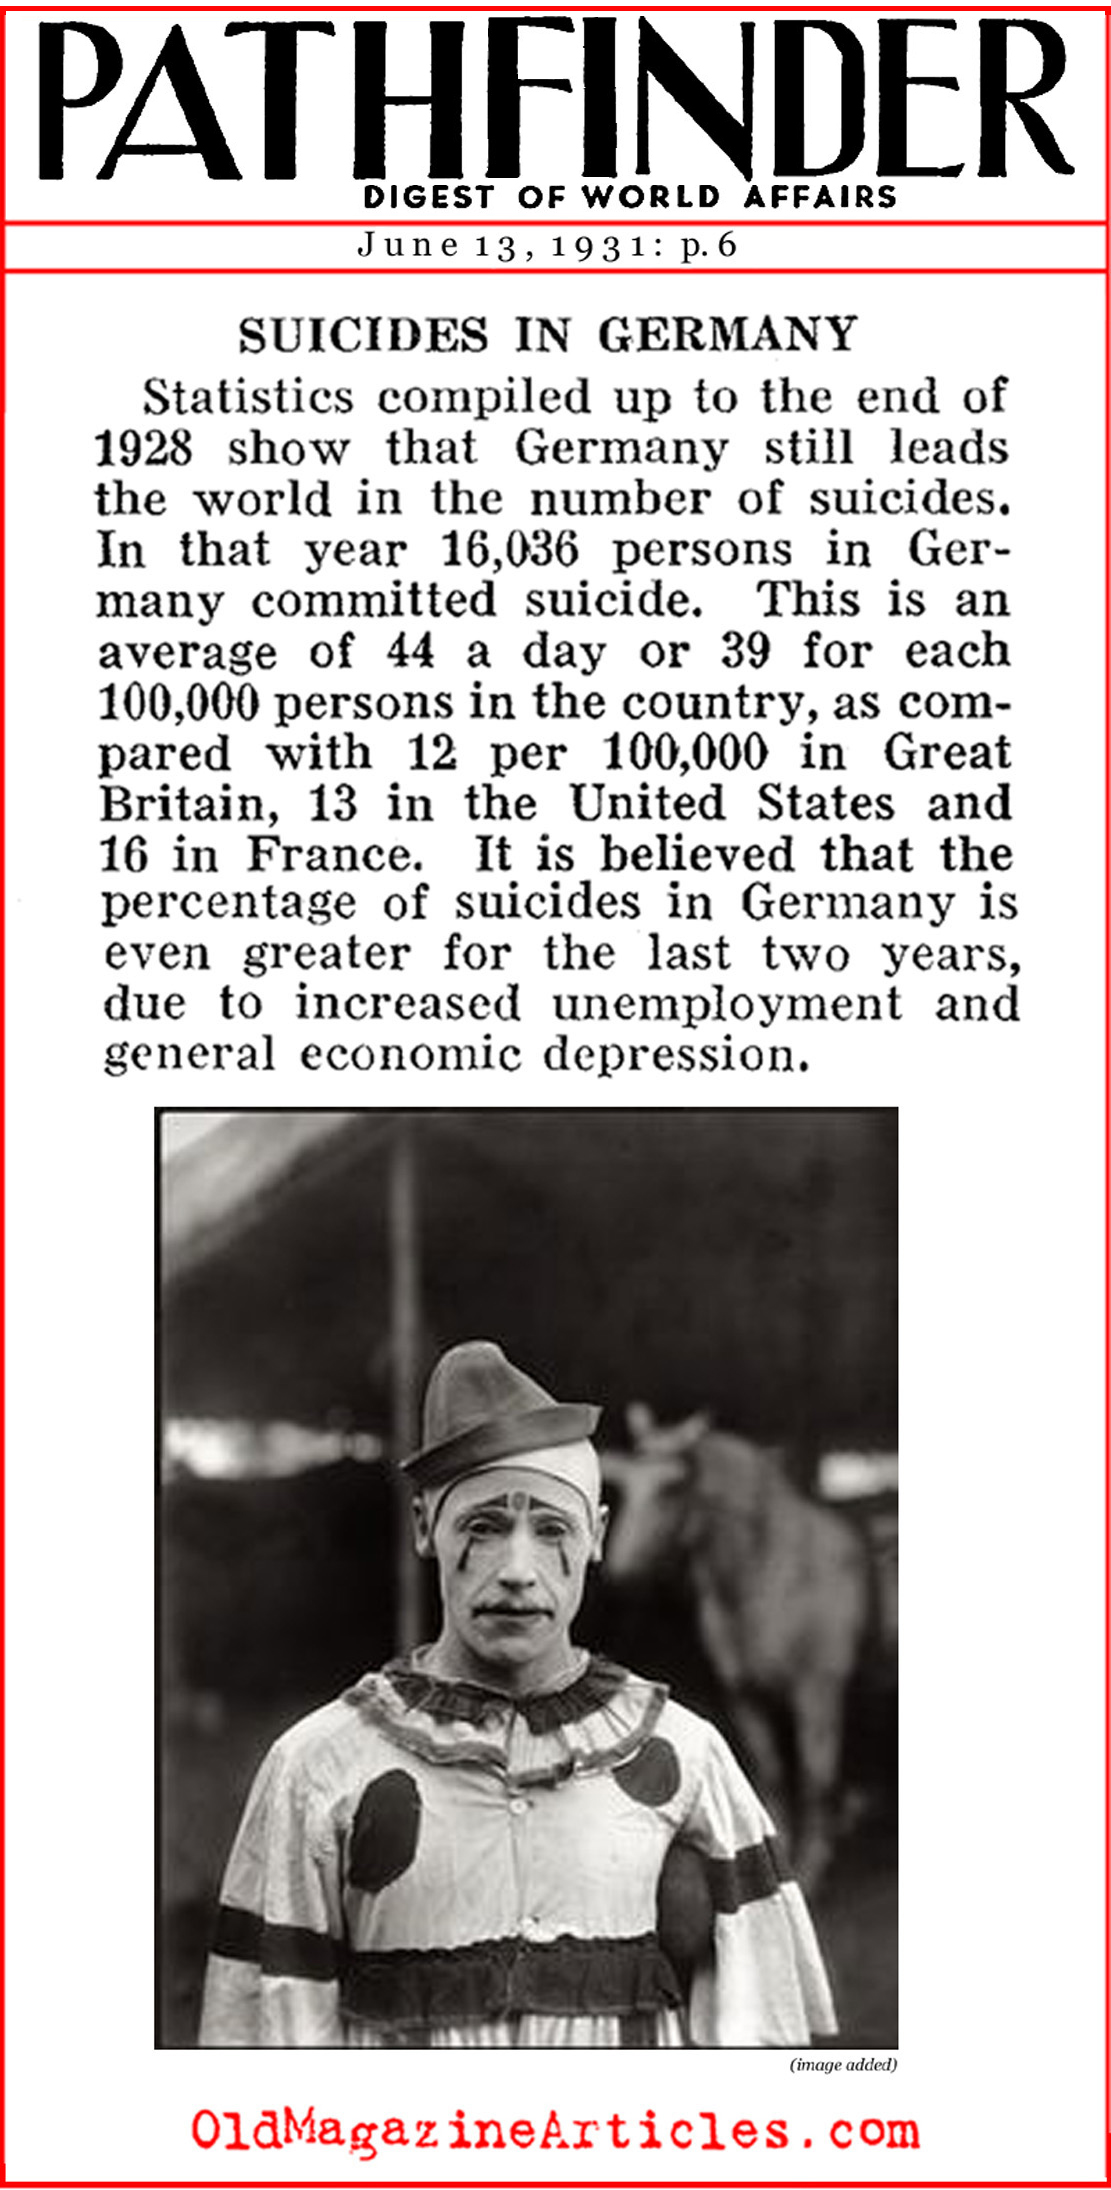 Over 15,000 Suicides in 1928 Germany (Pathfinder Magazine, 1931)